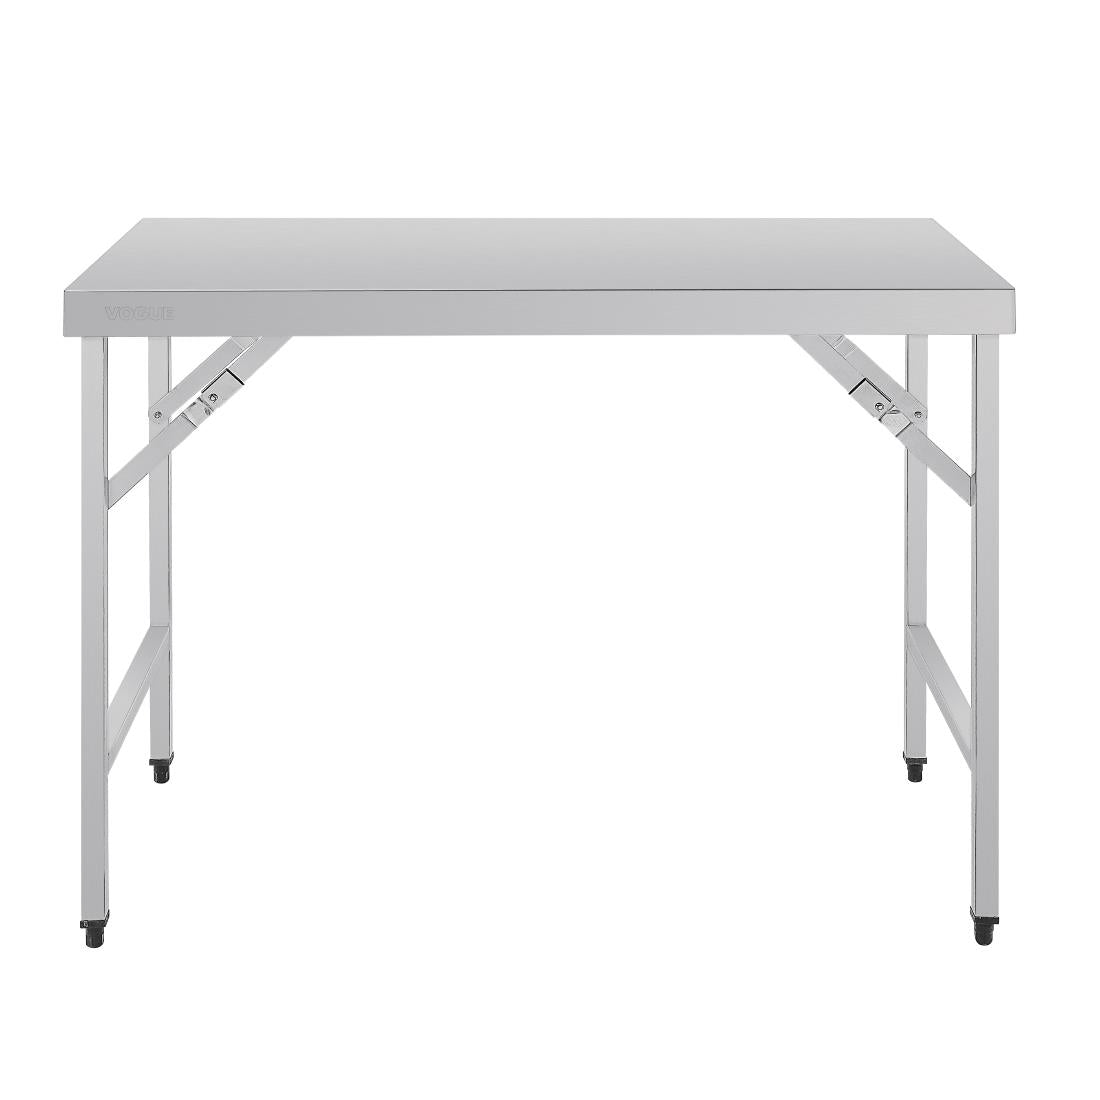 CB905 Vogue Stainless Steel Folding Table 1200mm JD Catering Equipment Solutions Ltd